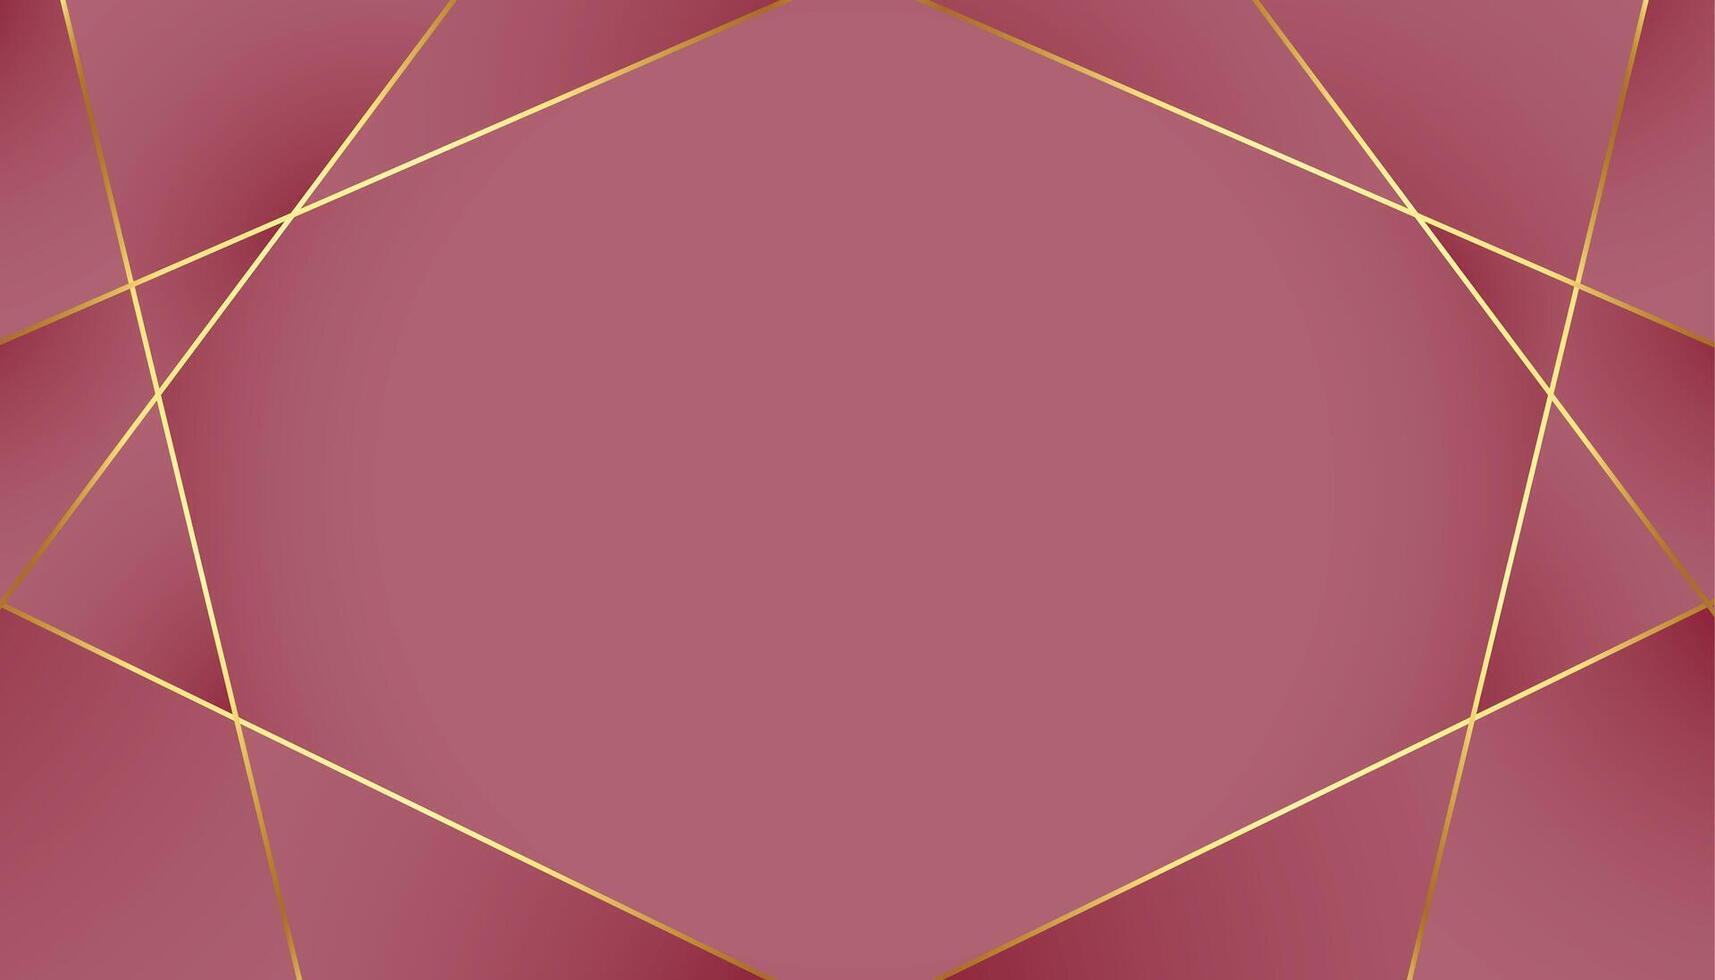 luxury royal background with golden low poly lines vector